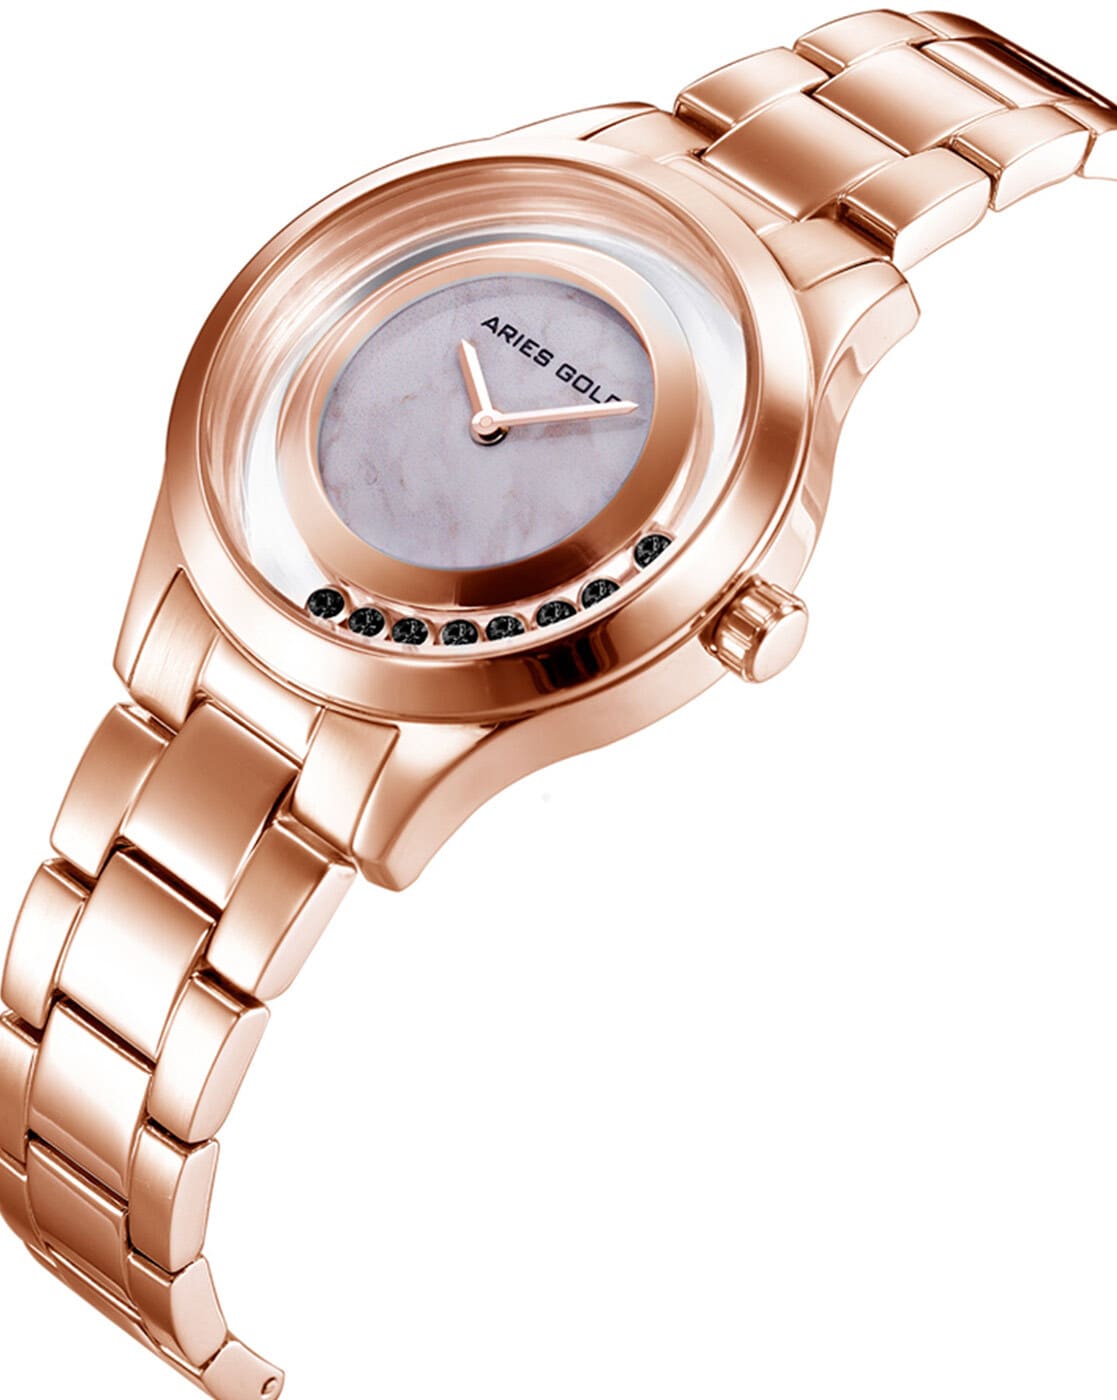 Watches by Rislet - LV GOLD BAG  50% OFF Was Rs.6,000/- Now Rs